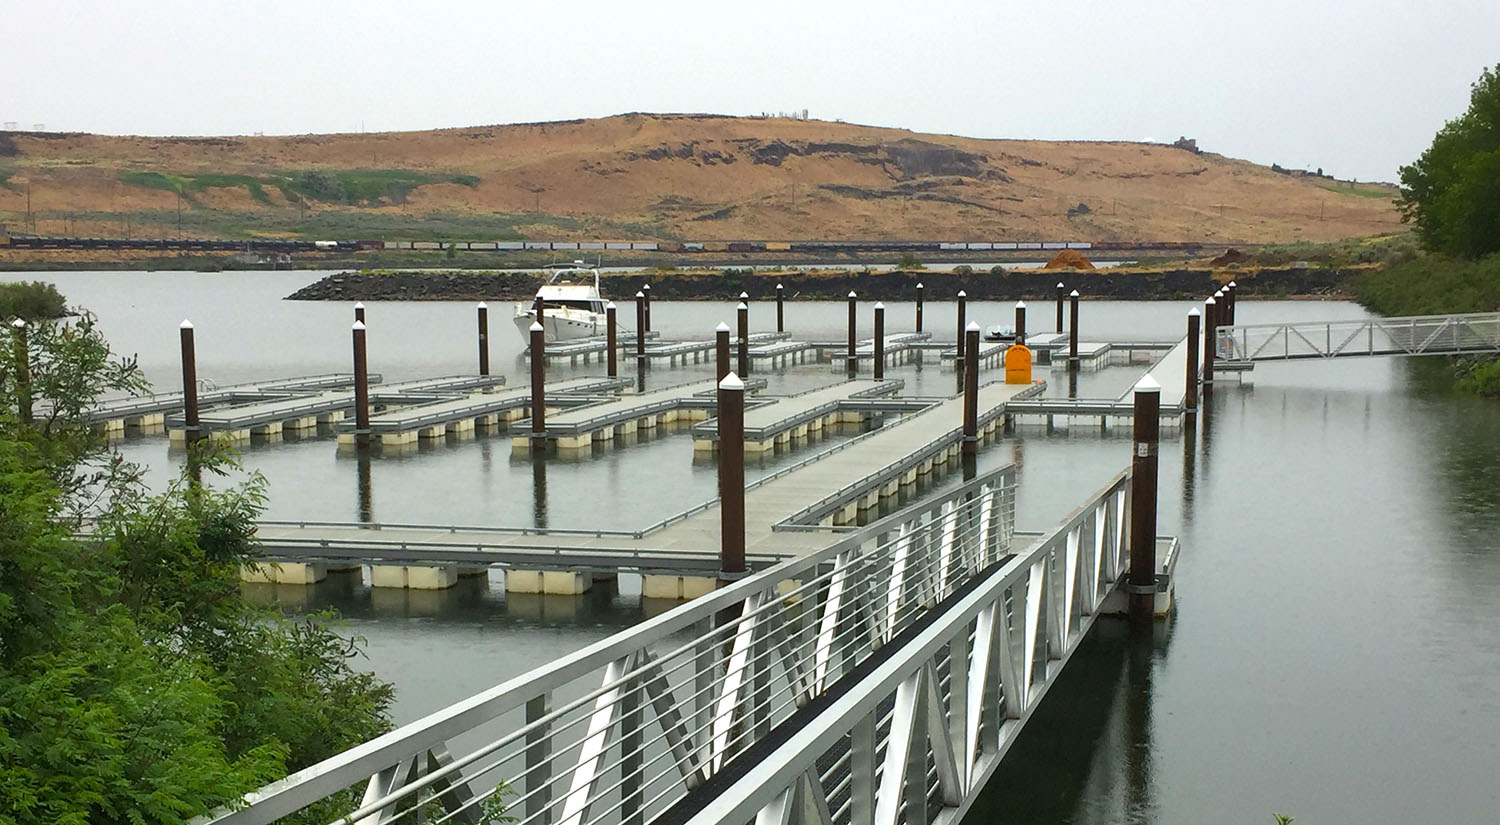 This year, the Port of Benton celebrates 10 years of its successful Crow Butte Park revitalization project with ongoing improvements, including expanded dock facilities and electrical upgrades. (Photo: Port of Benton)